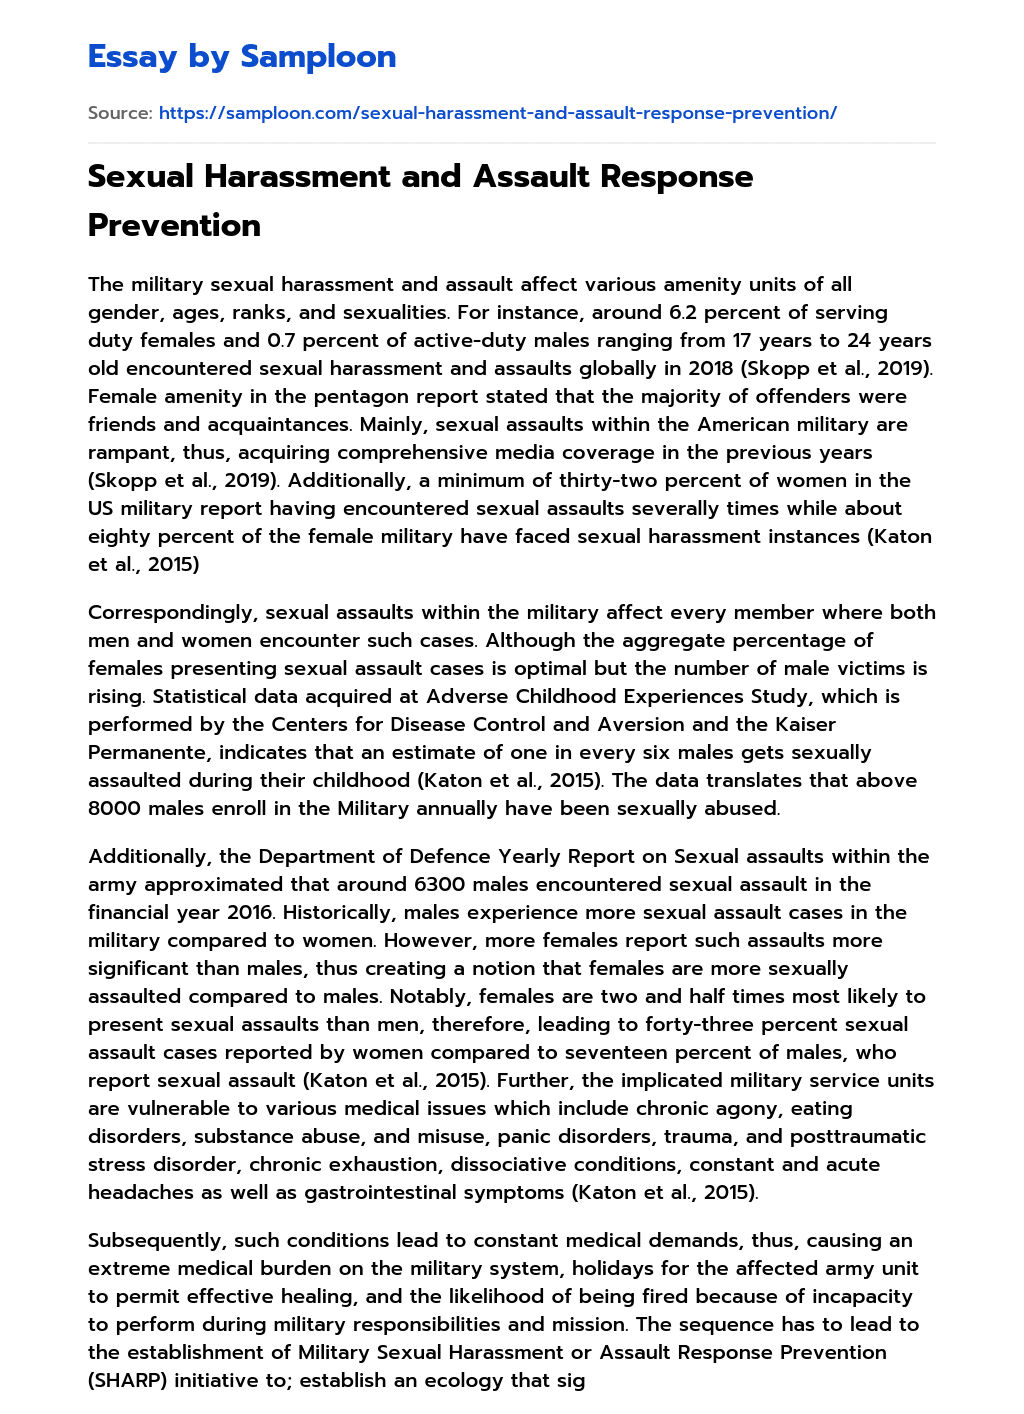 Sexual Harassment and Assault Response Prevention essay